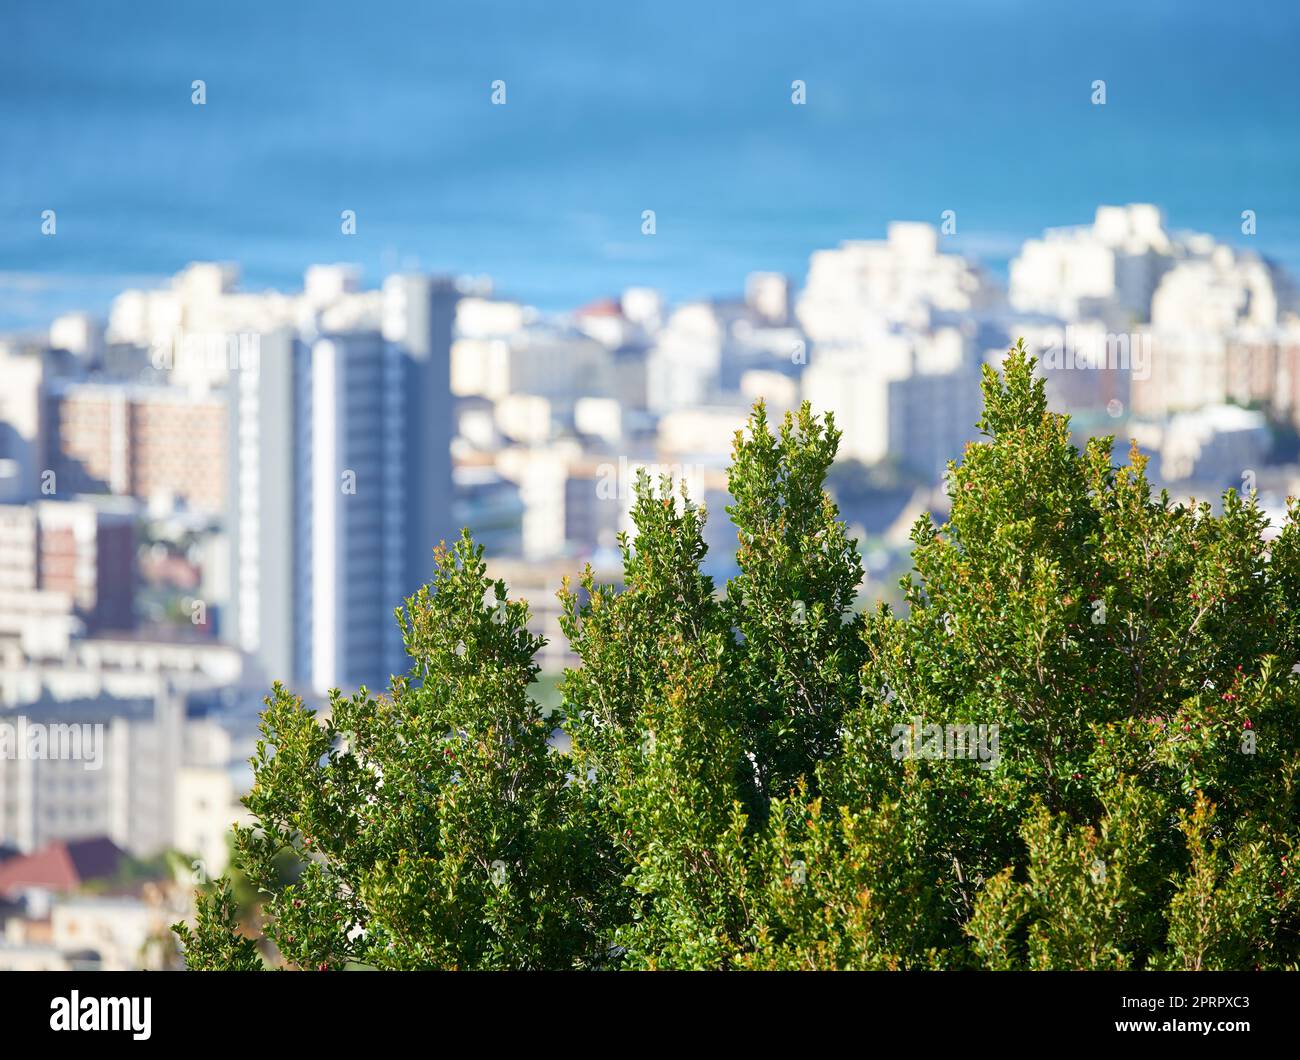 Take a vacation in paradise. a city on the coastline with mountains surrounding it. Stock Photo